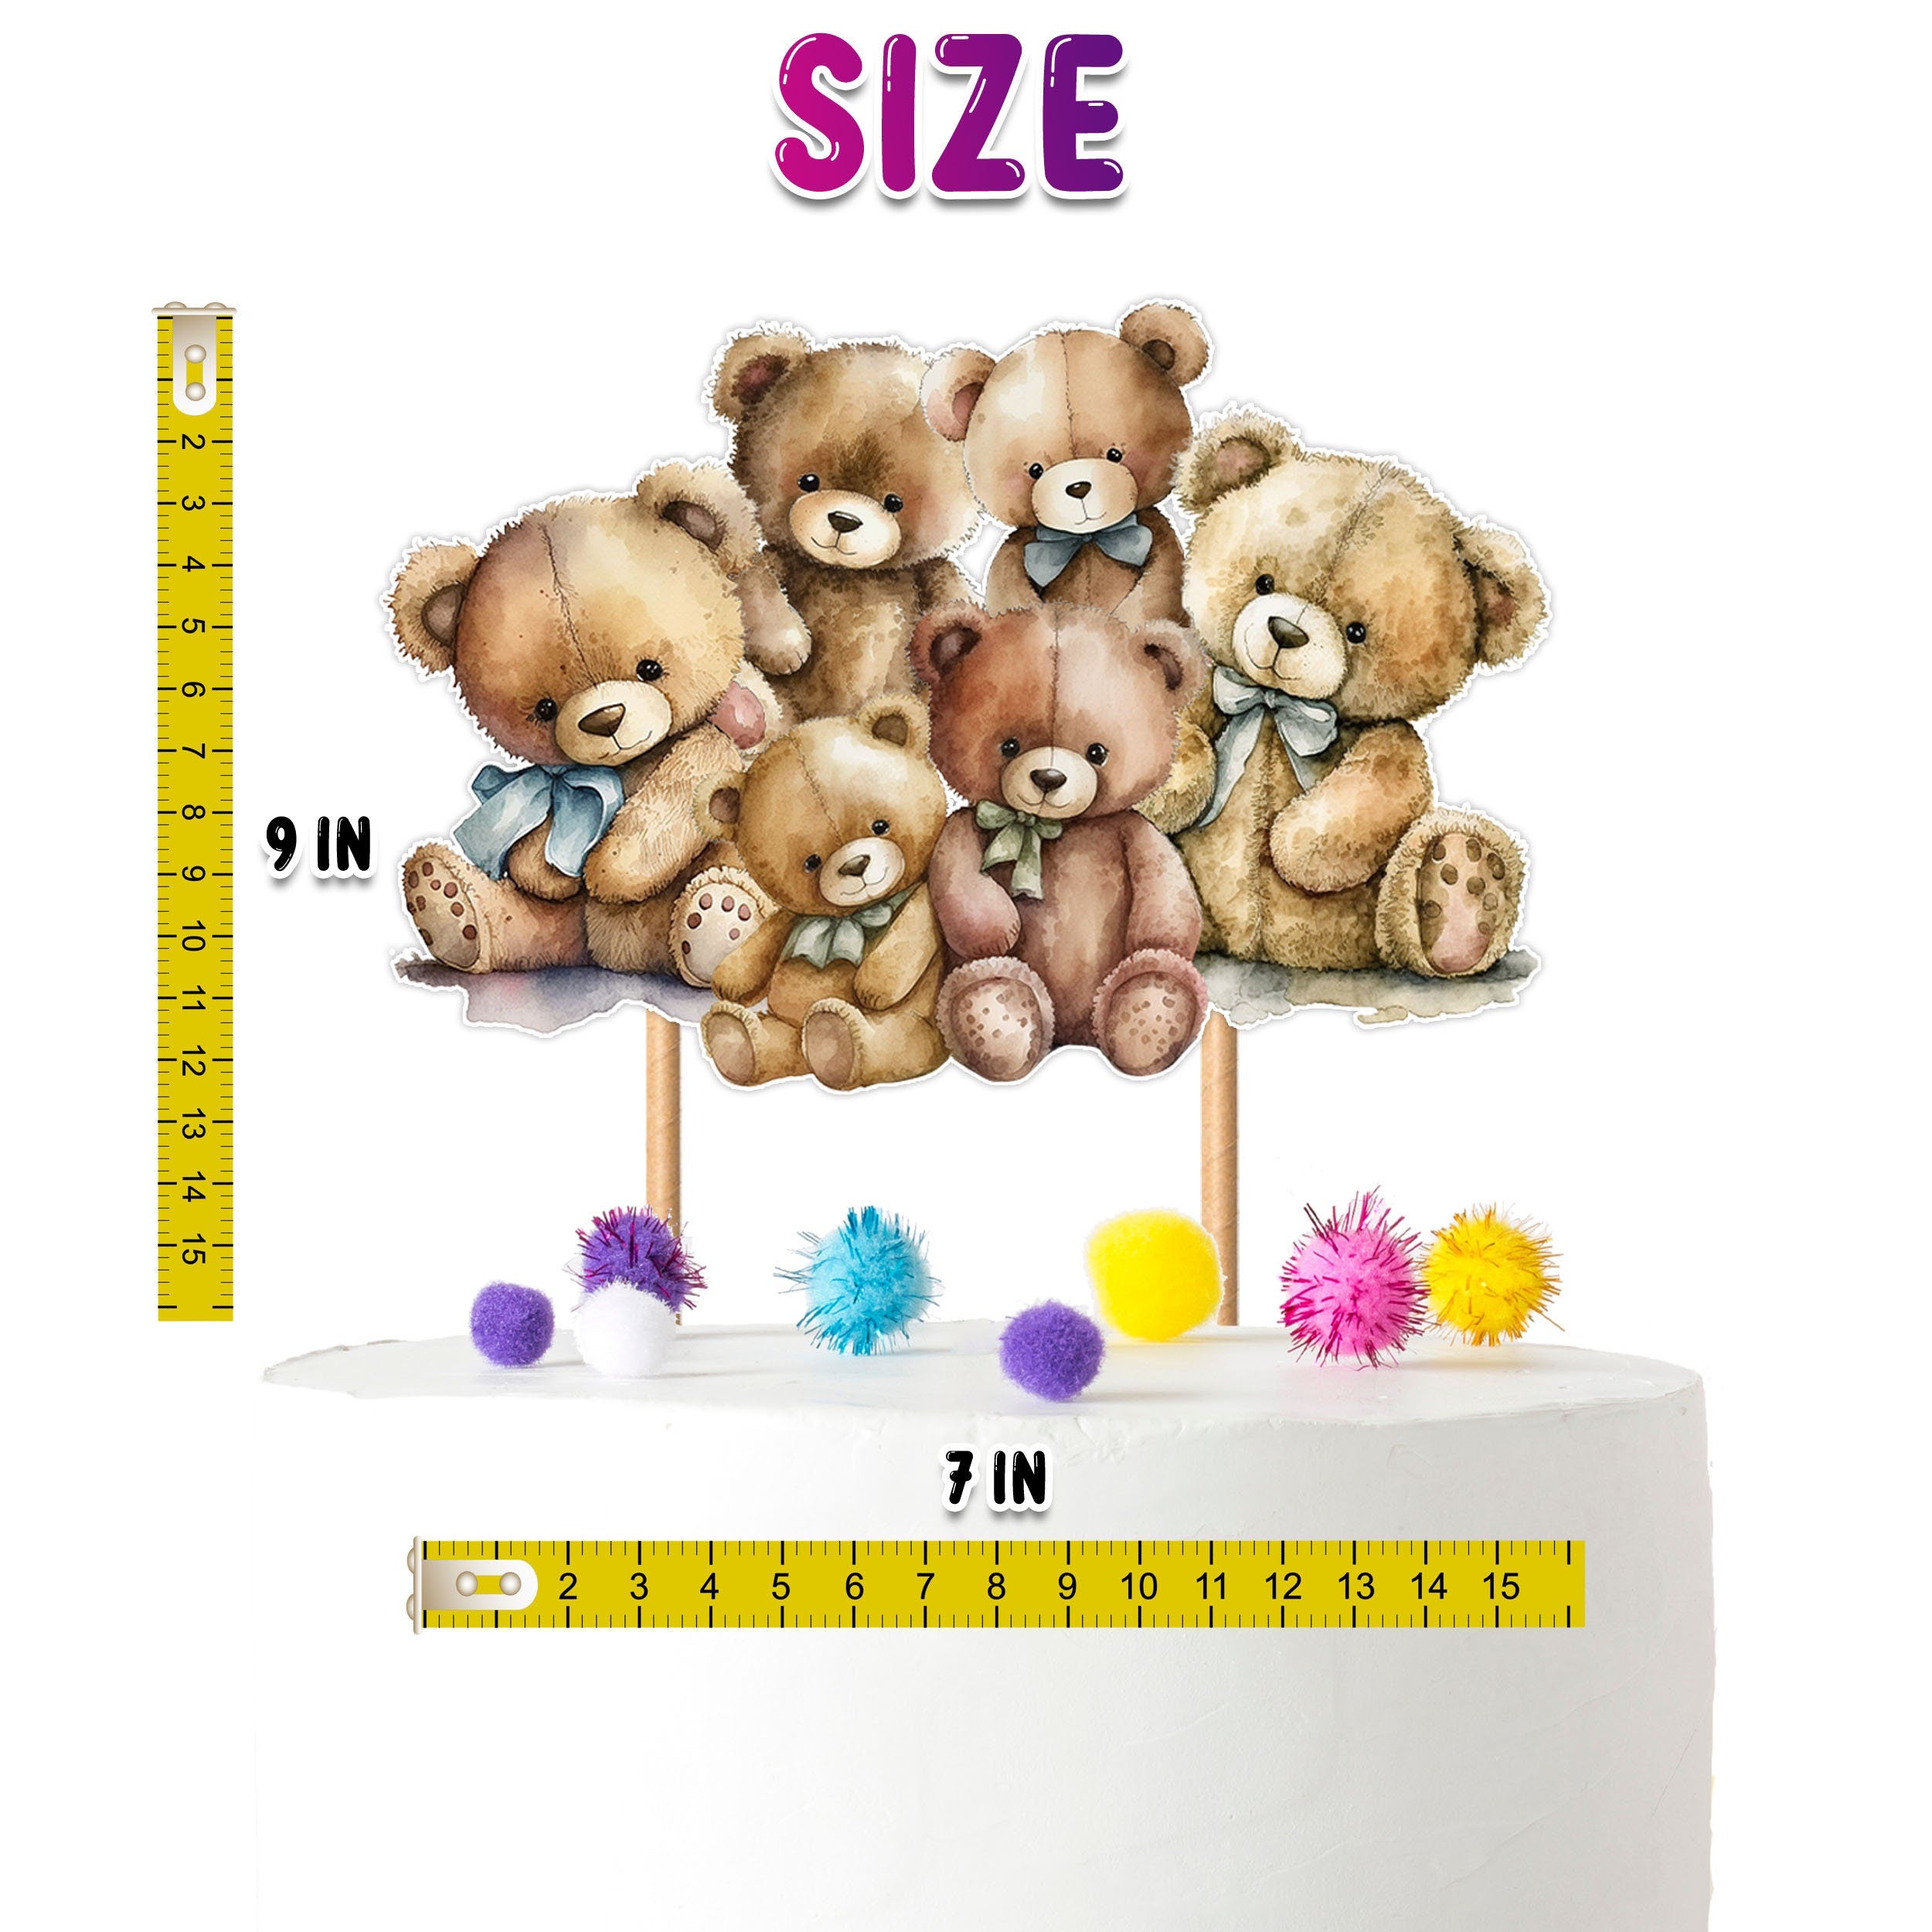 Adorable Bears Cake Topper – Ideal for Baby Showers and Birthday Celebrations